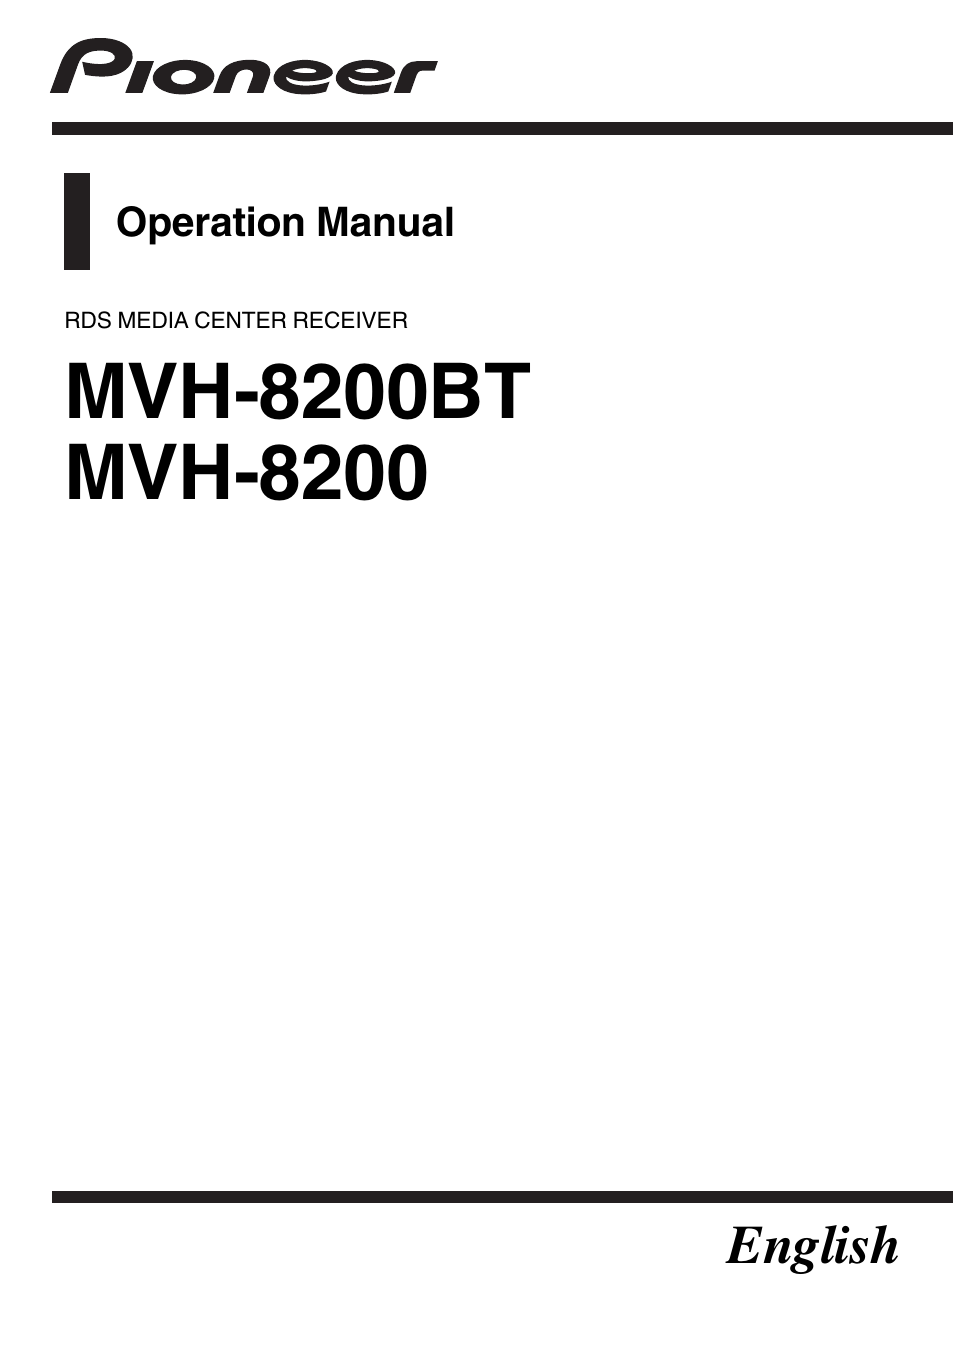 Pioneer MVH-8200BT User Manual | 48 pages | Also for: MVH-8200